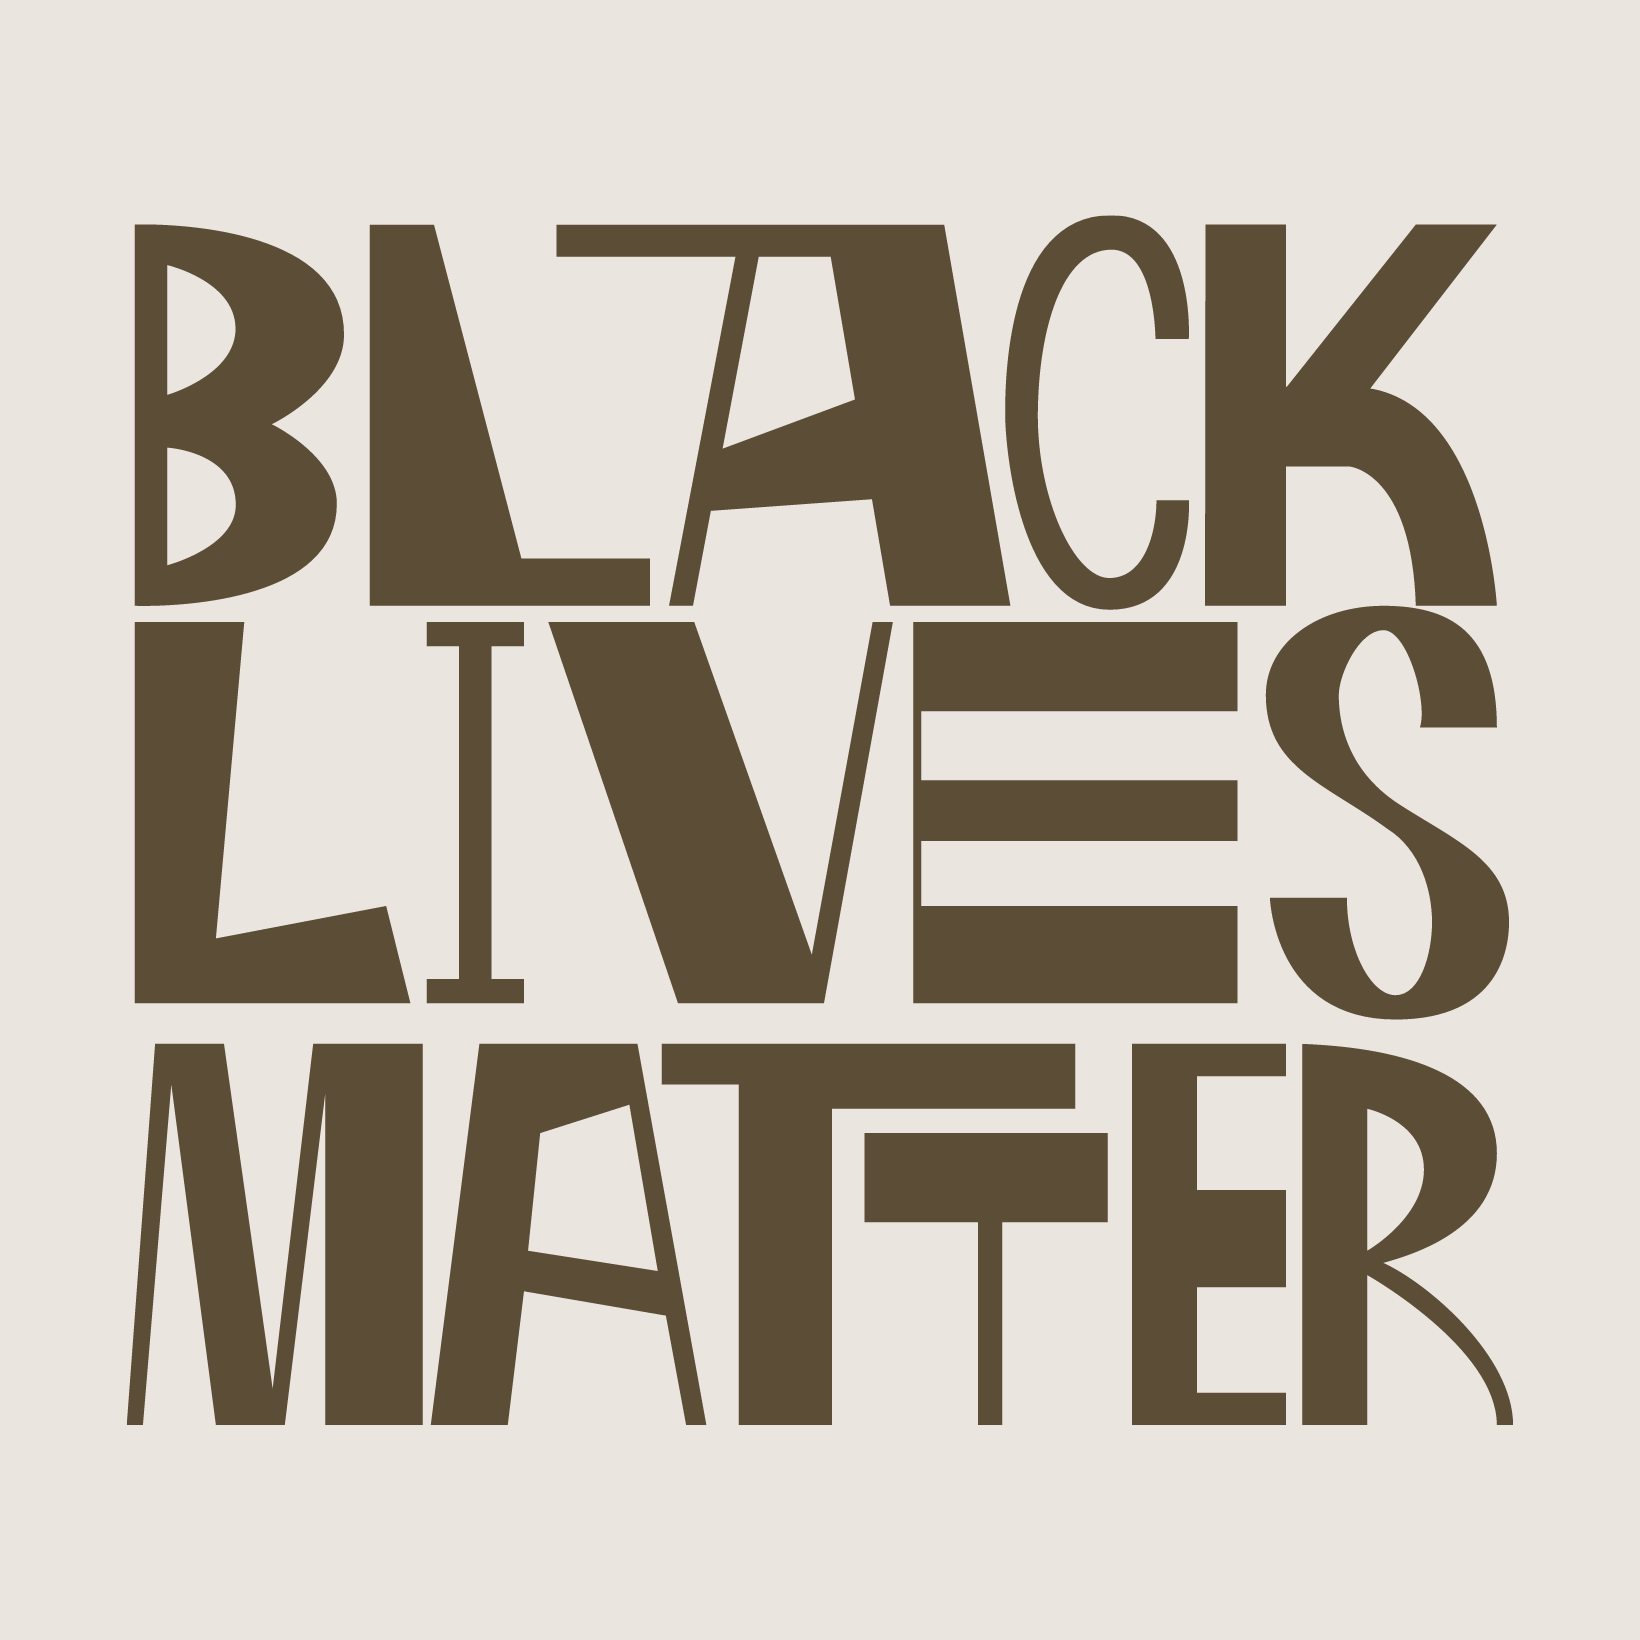 Black Lives Matter Email from 06/02/2020